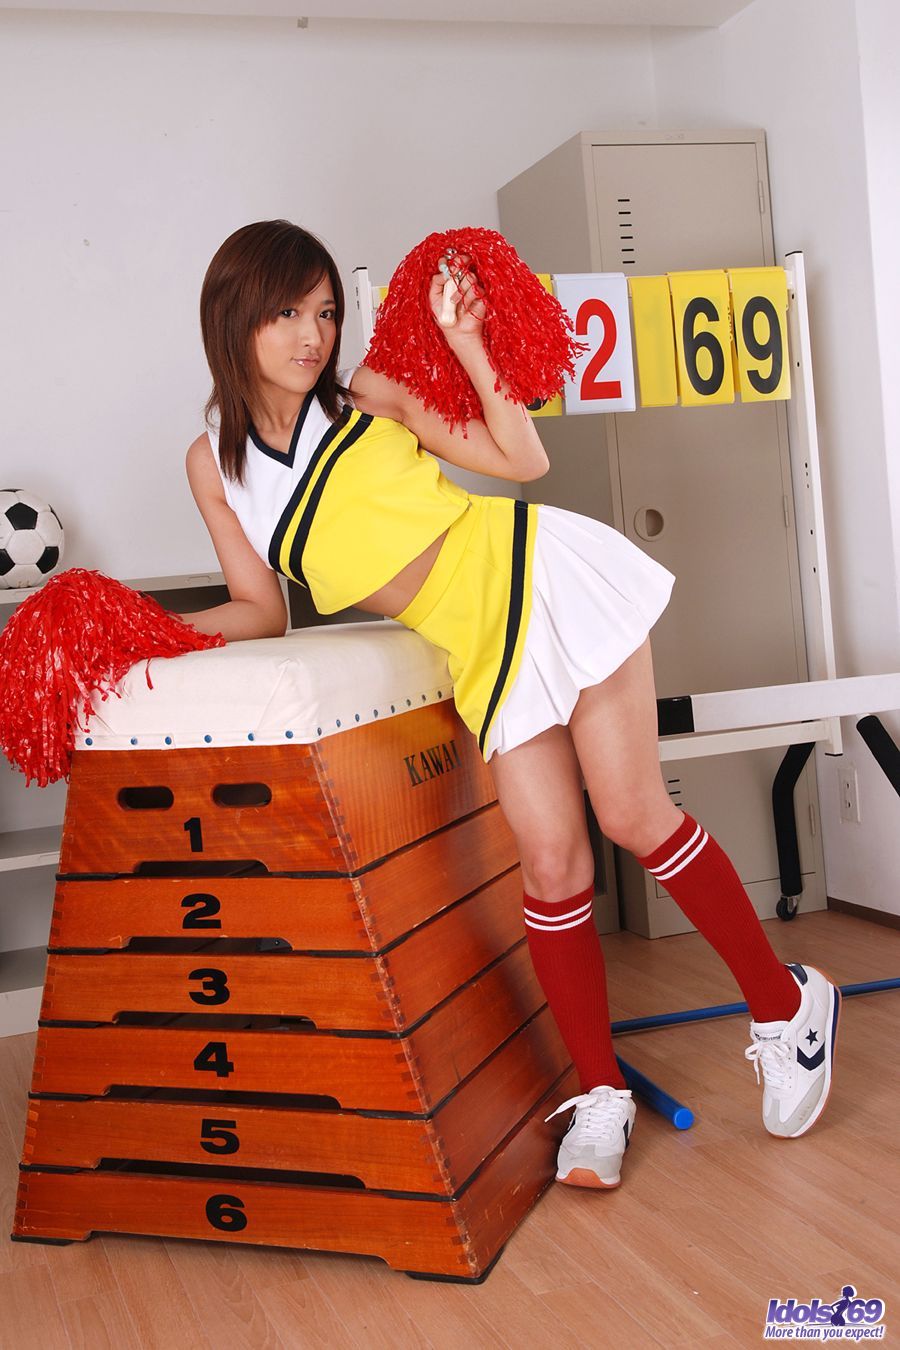 Asian Pussy Gym - Slutty cheerleader shows off her hairy pussy in the gym